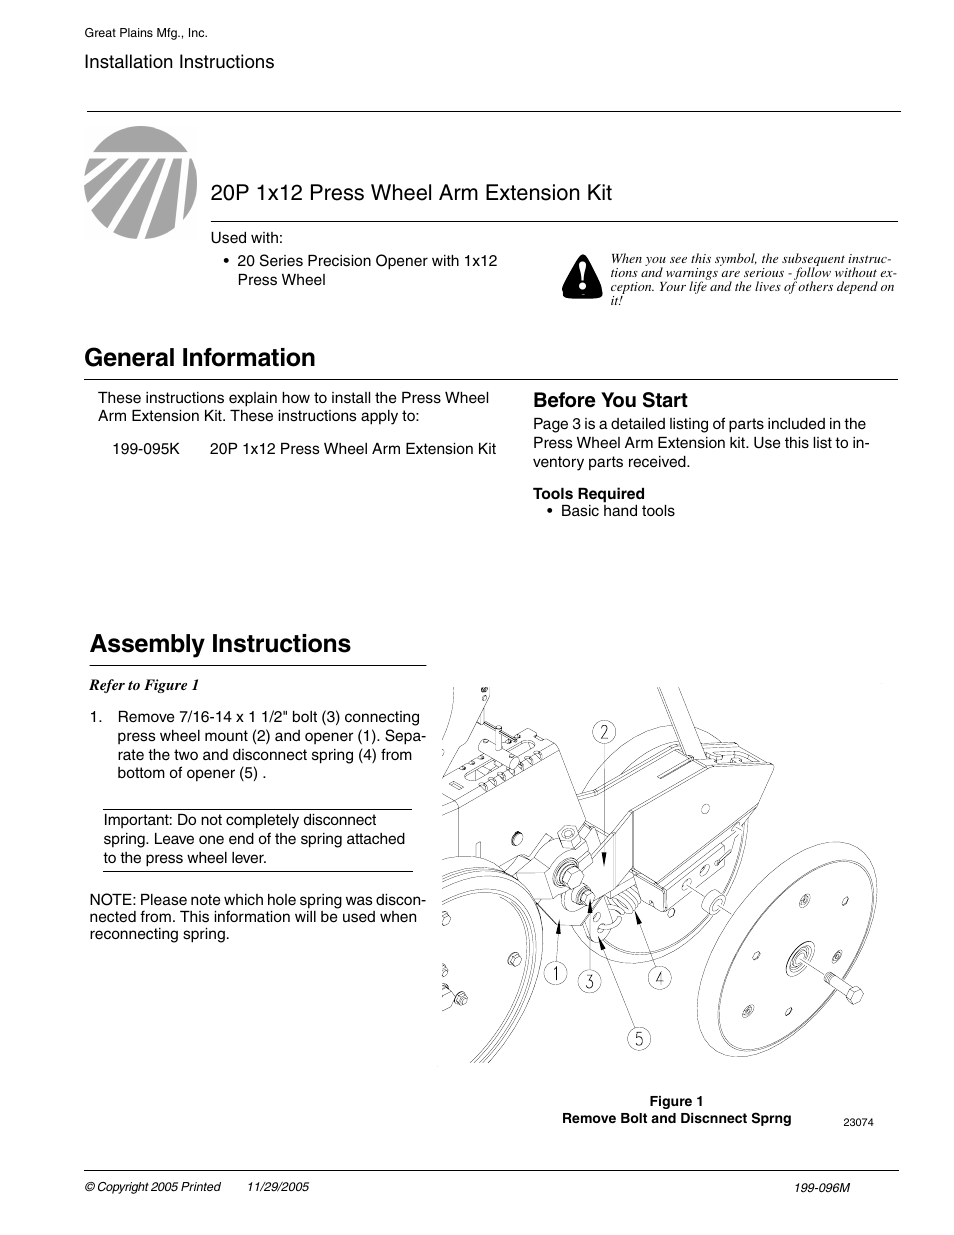 Great Plains 20P 1x12 Press Wheel Arm Extension Kit User Manual | 3 pages